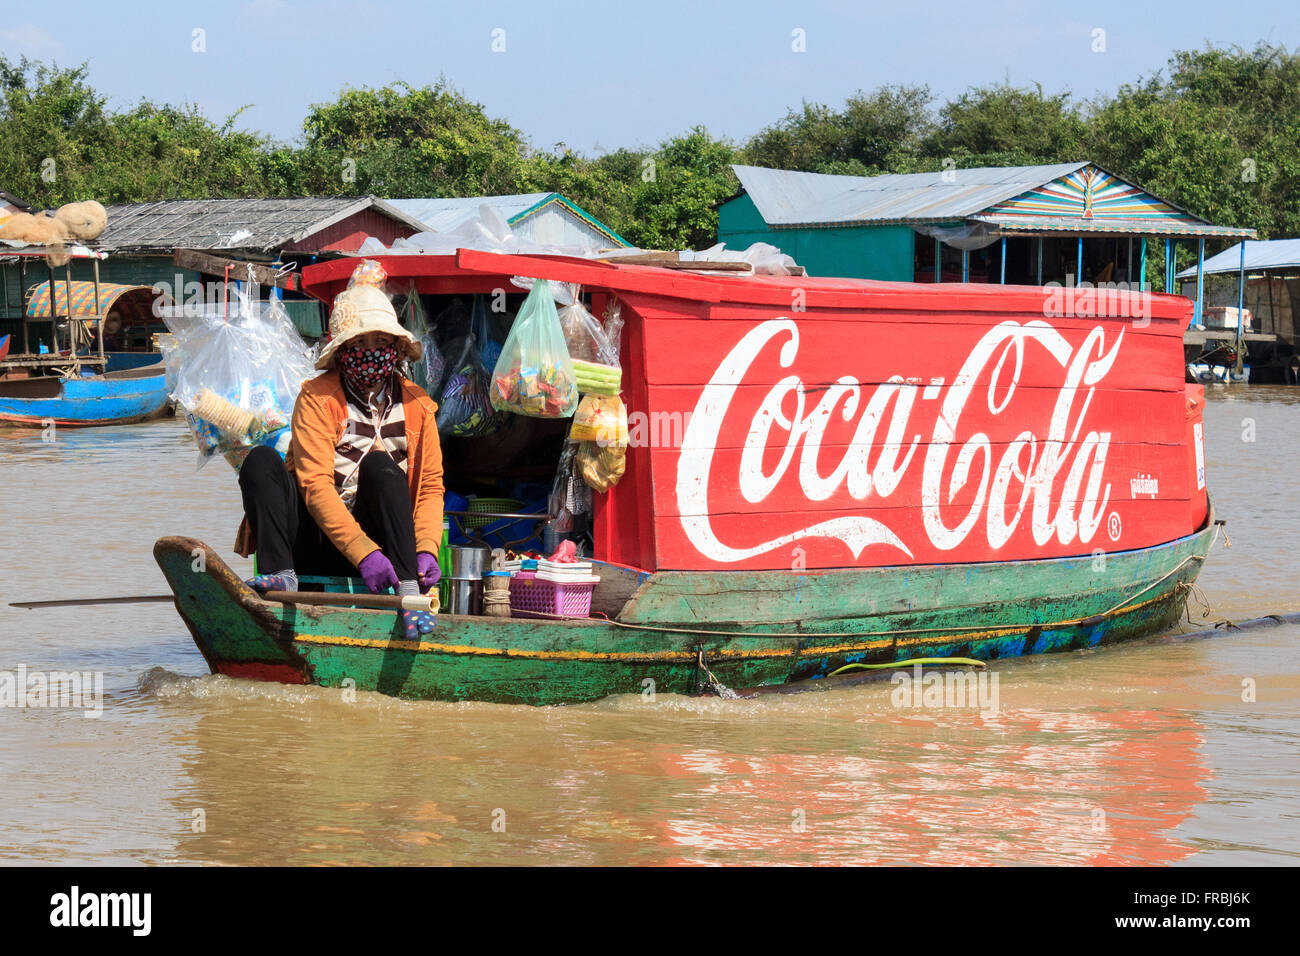 Tonle sap lake near Siem Reap, Cambodia, January 10, 2014: Coca Cola logo painted on wooden boat, floating village, Cambodia. Co Stock Photo